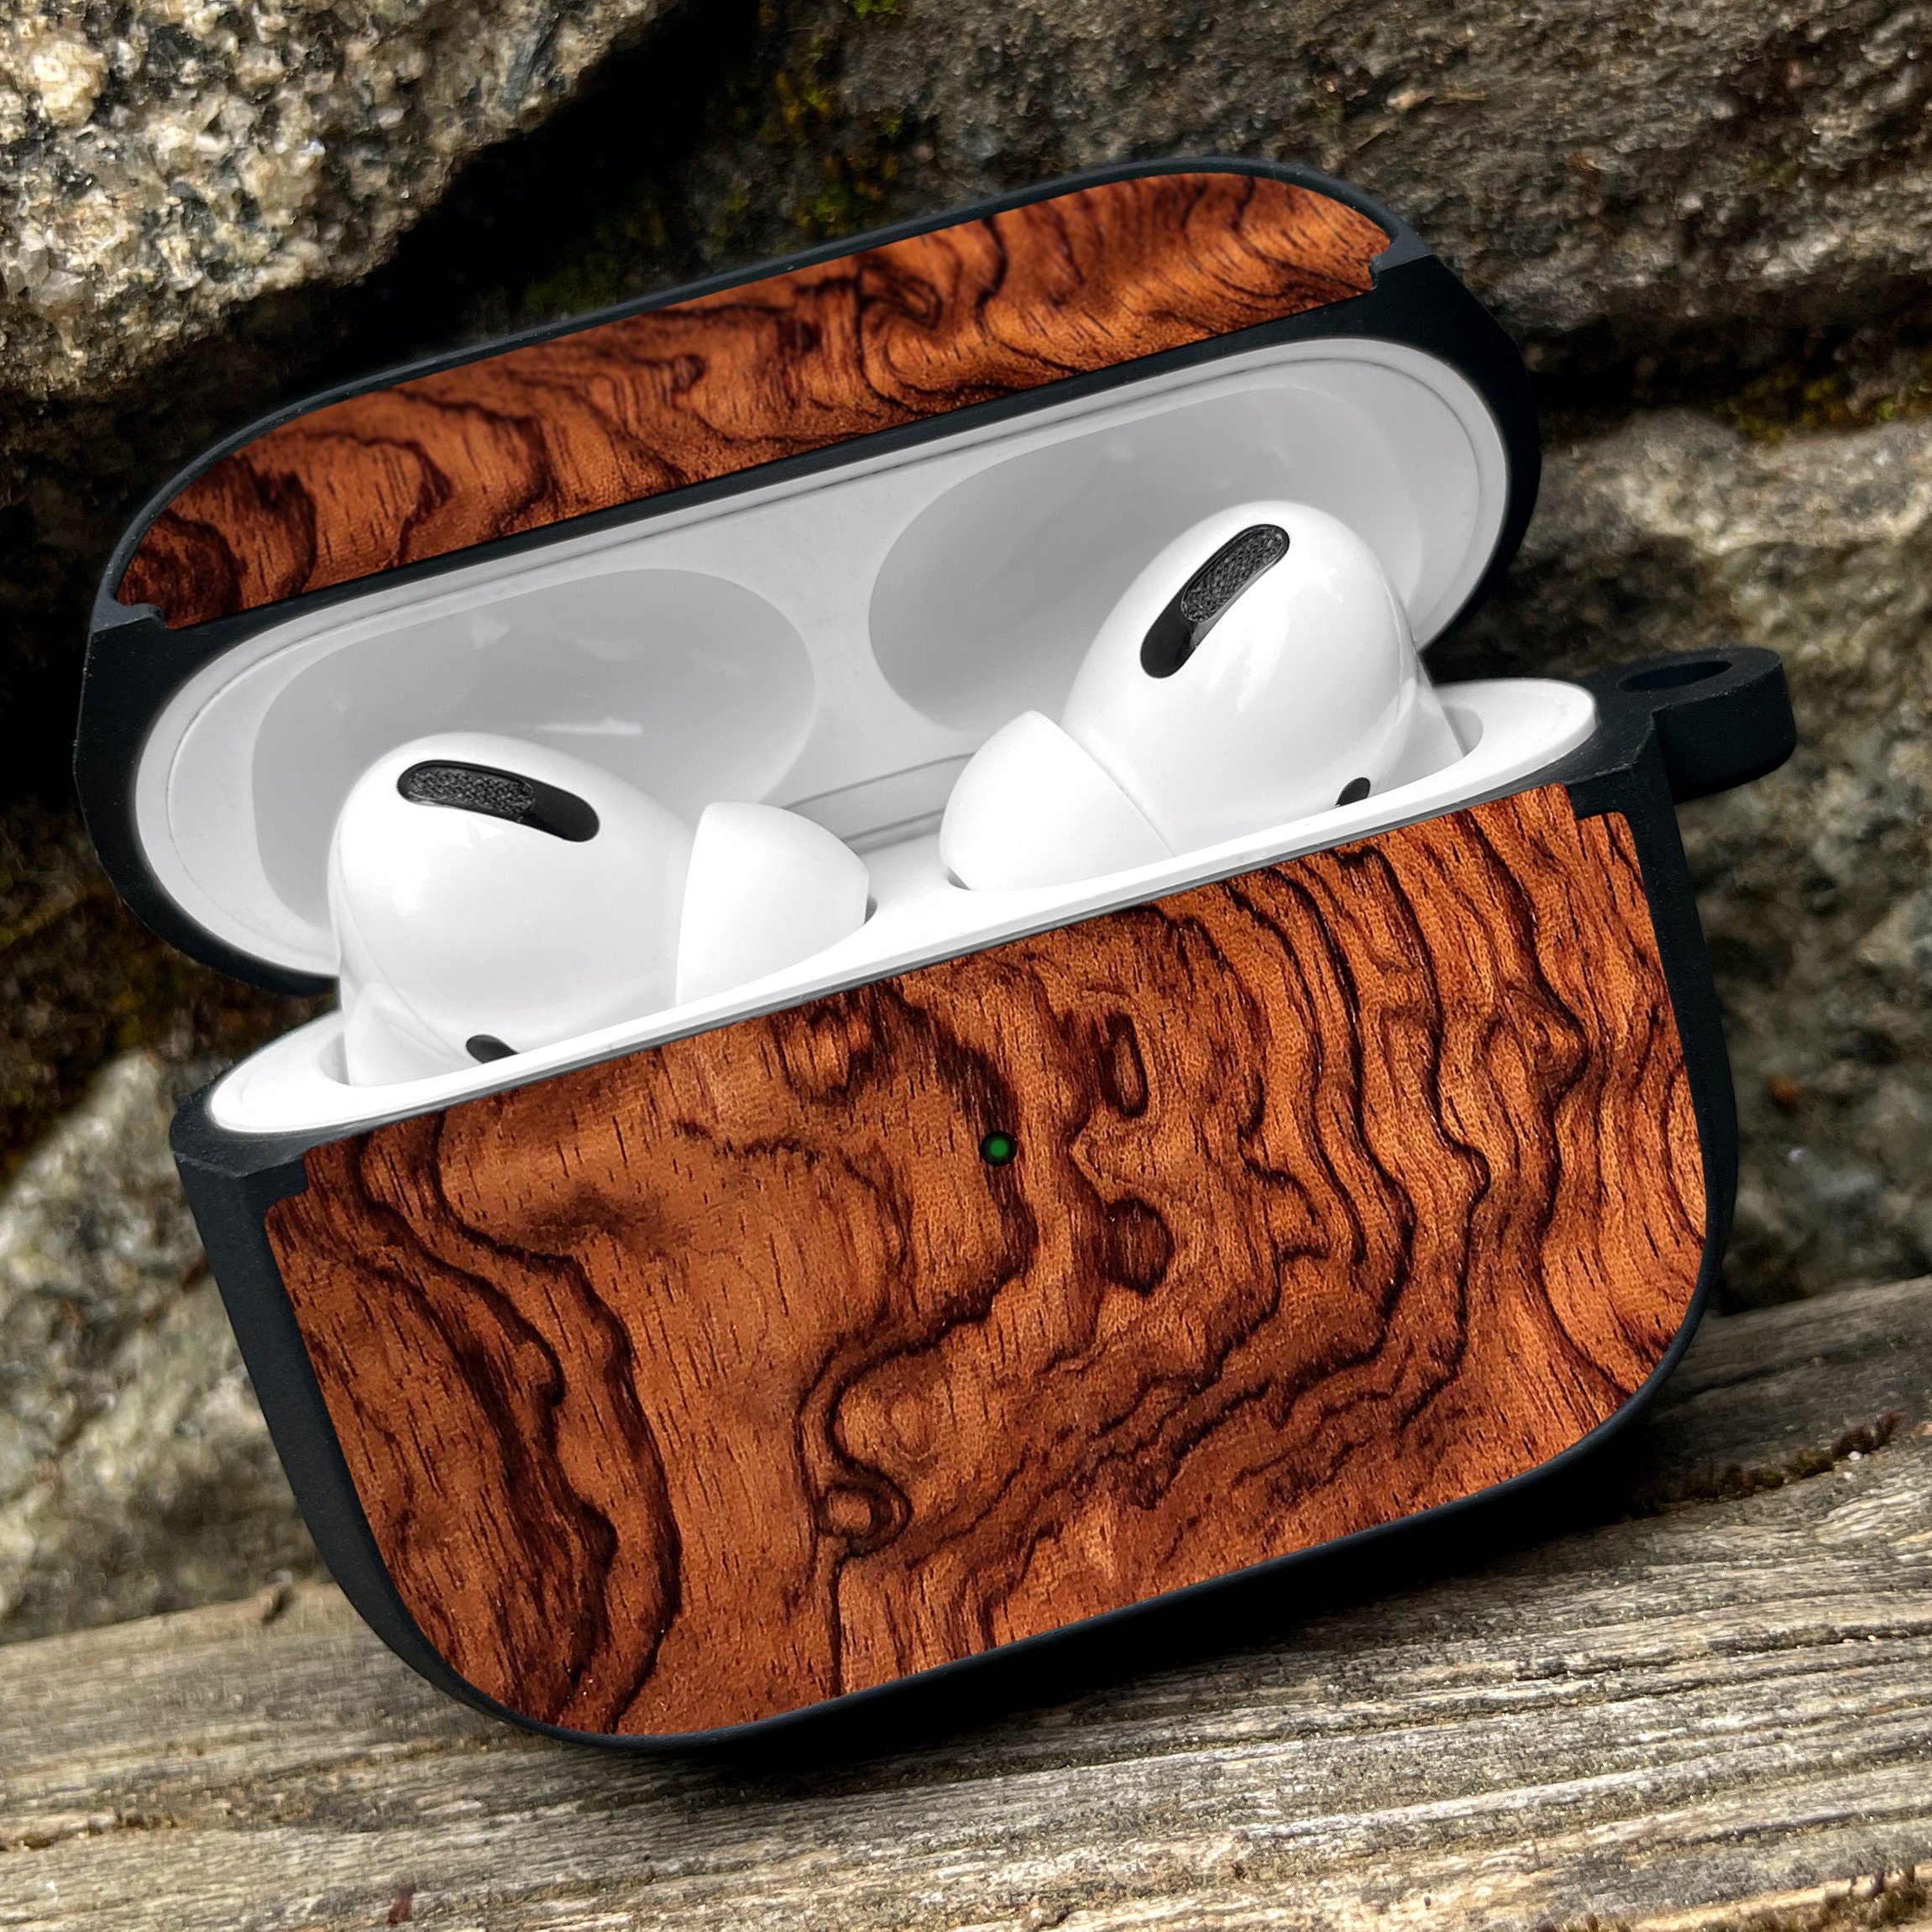 Wireless Charging Case for AirPods